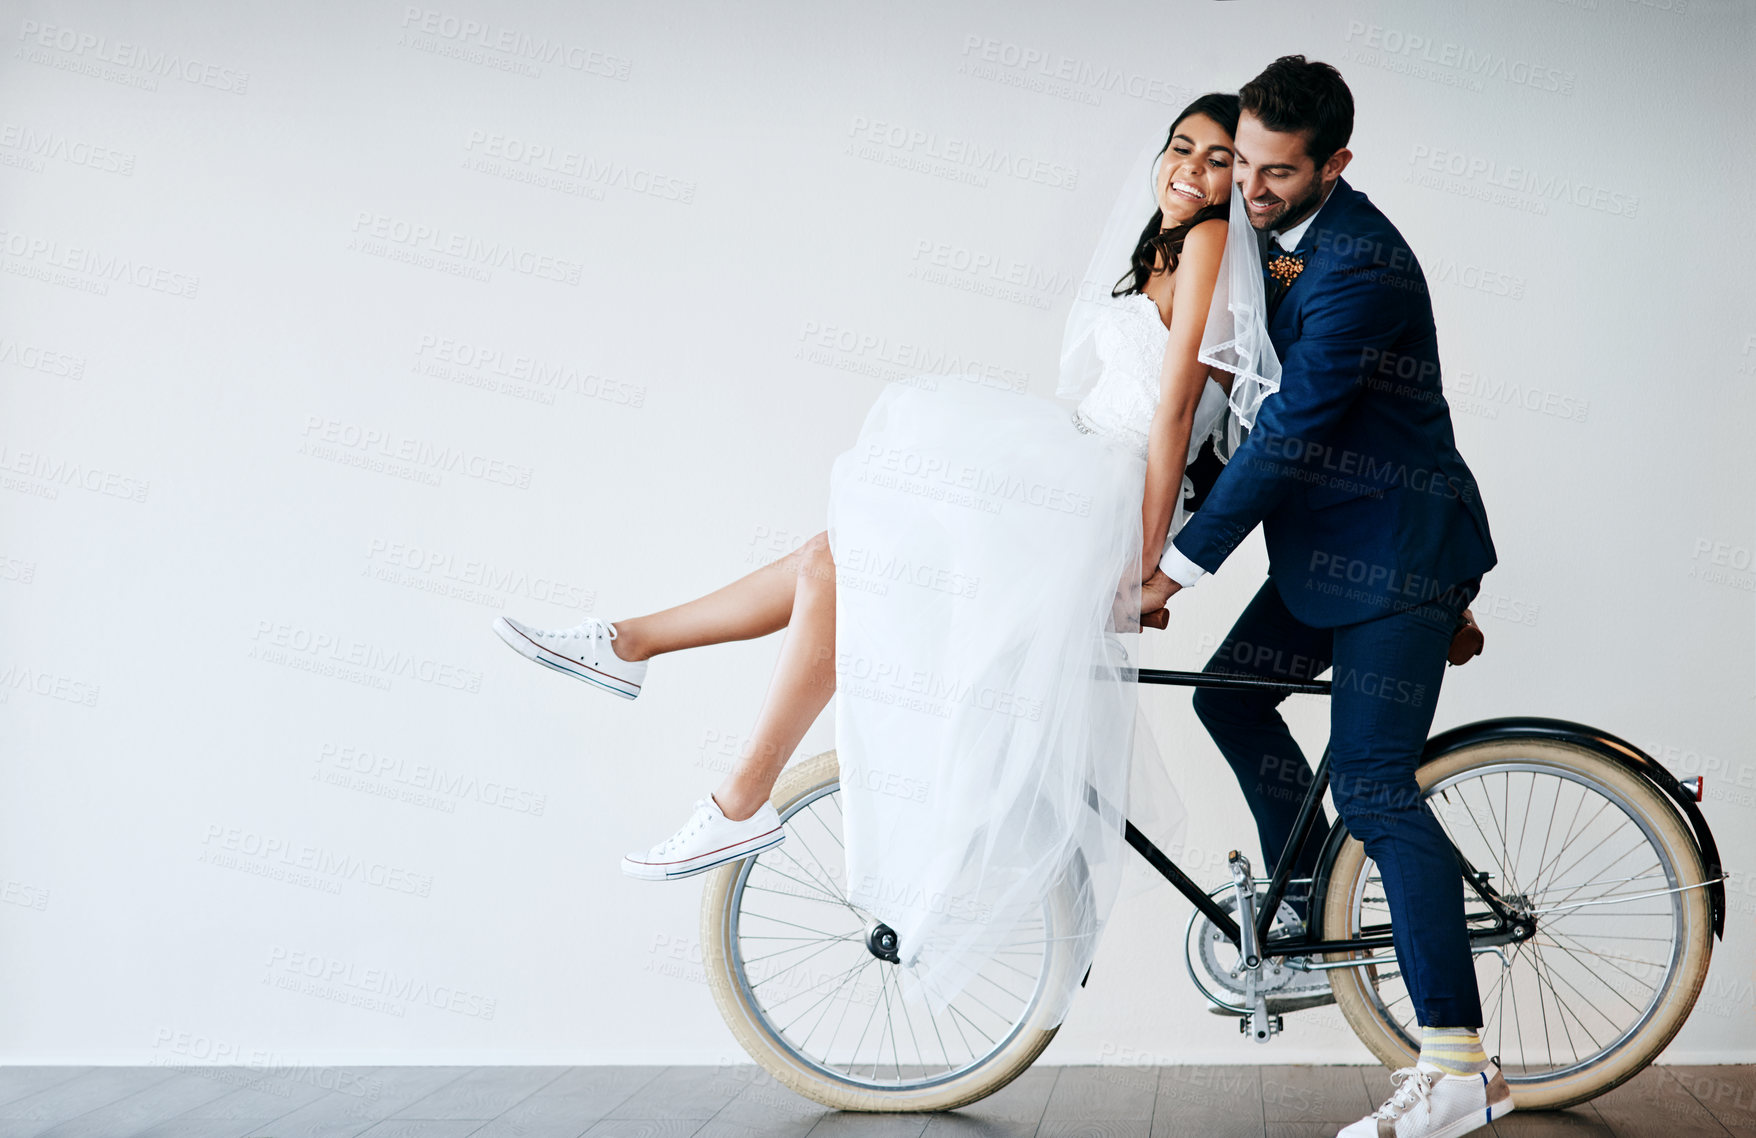 Buy stock photo Studio shot of a newly married young couple riding a bicycle together against a gray background